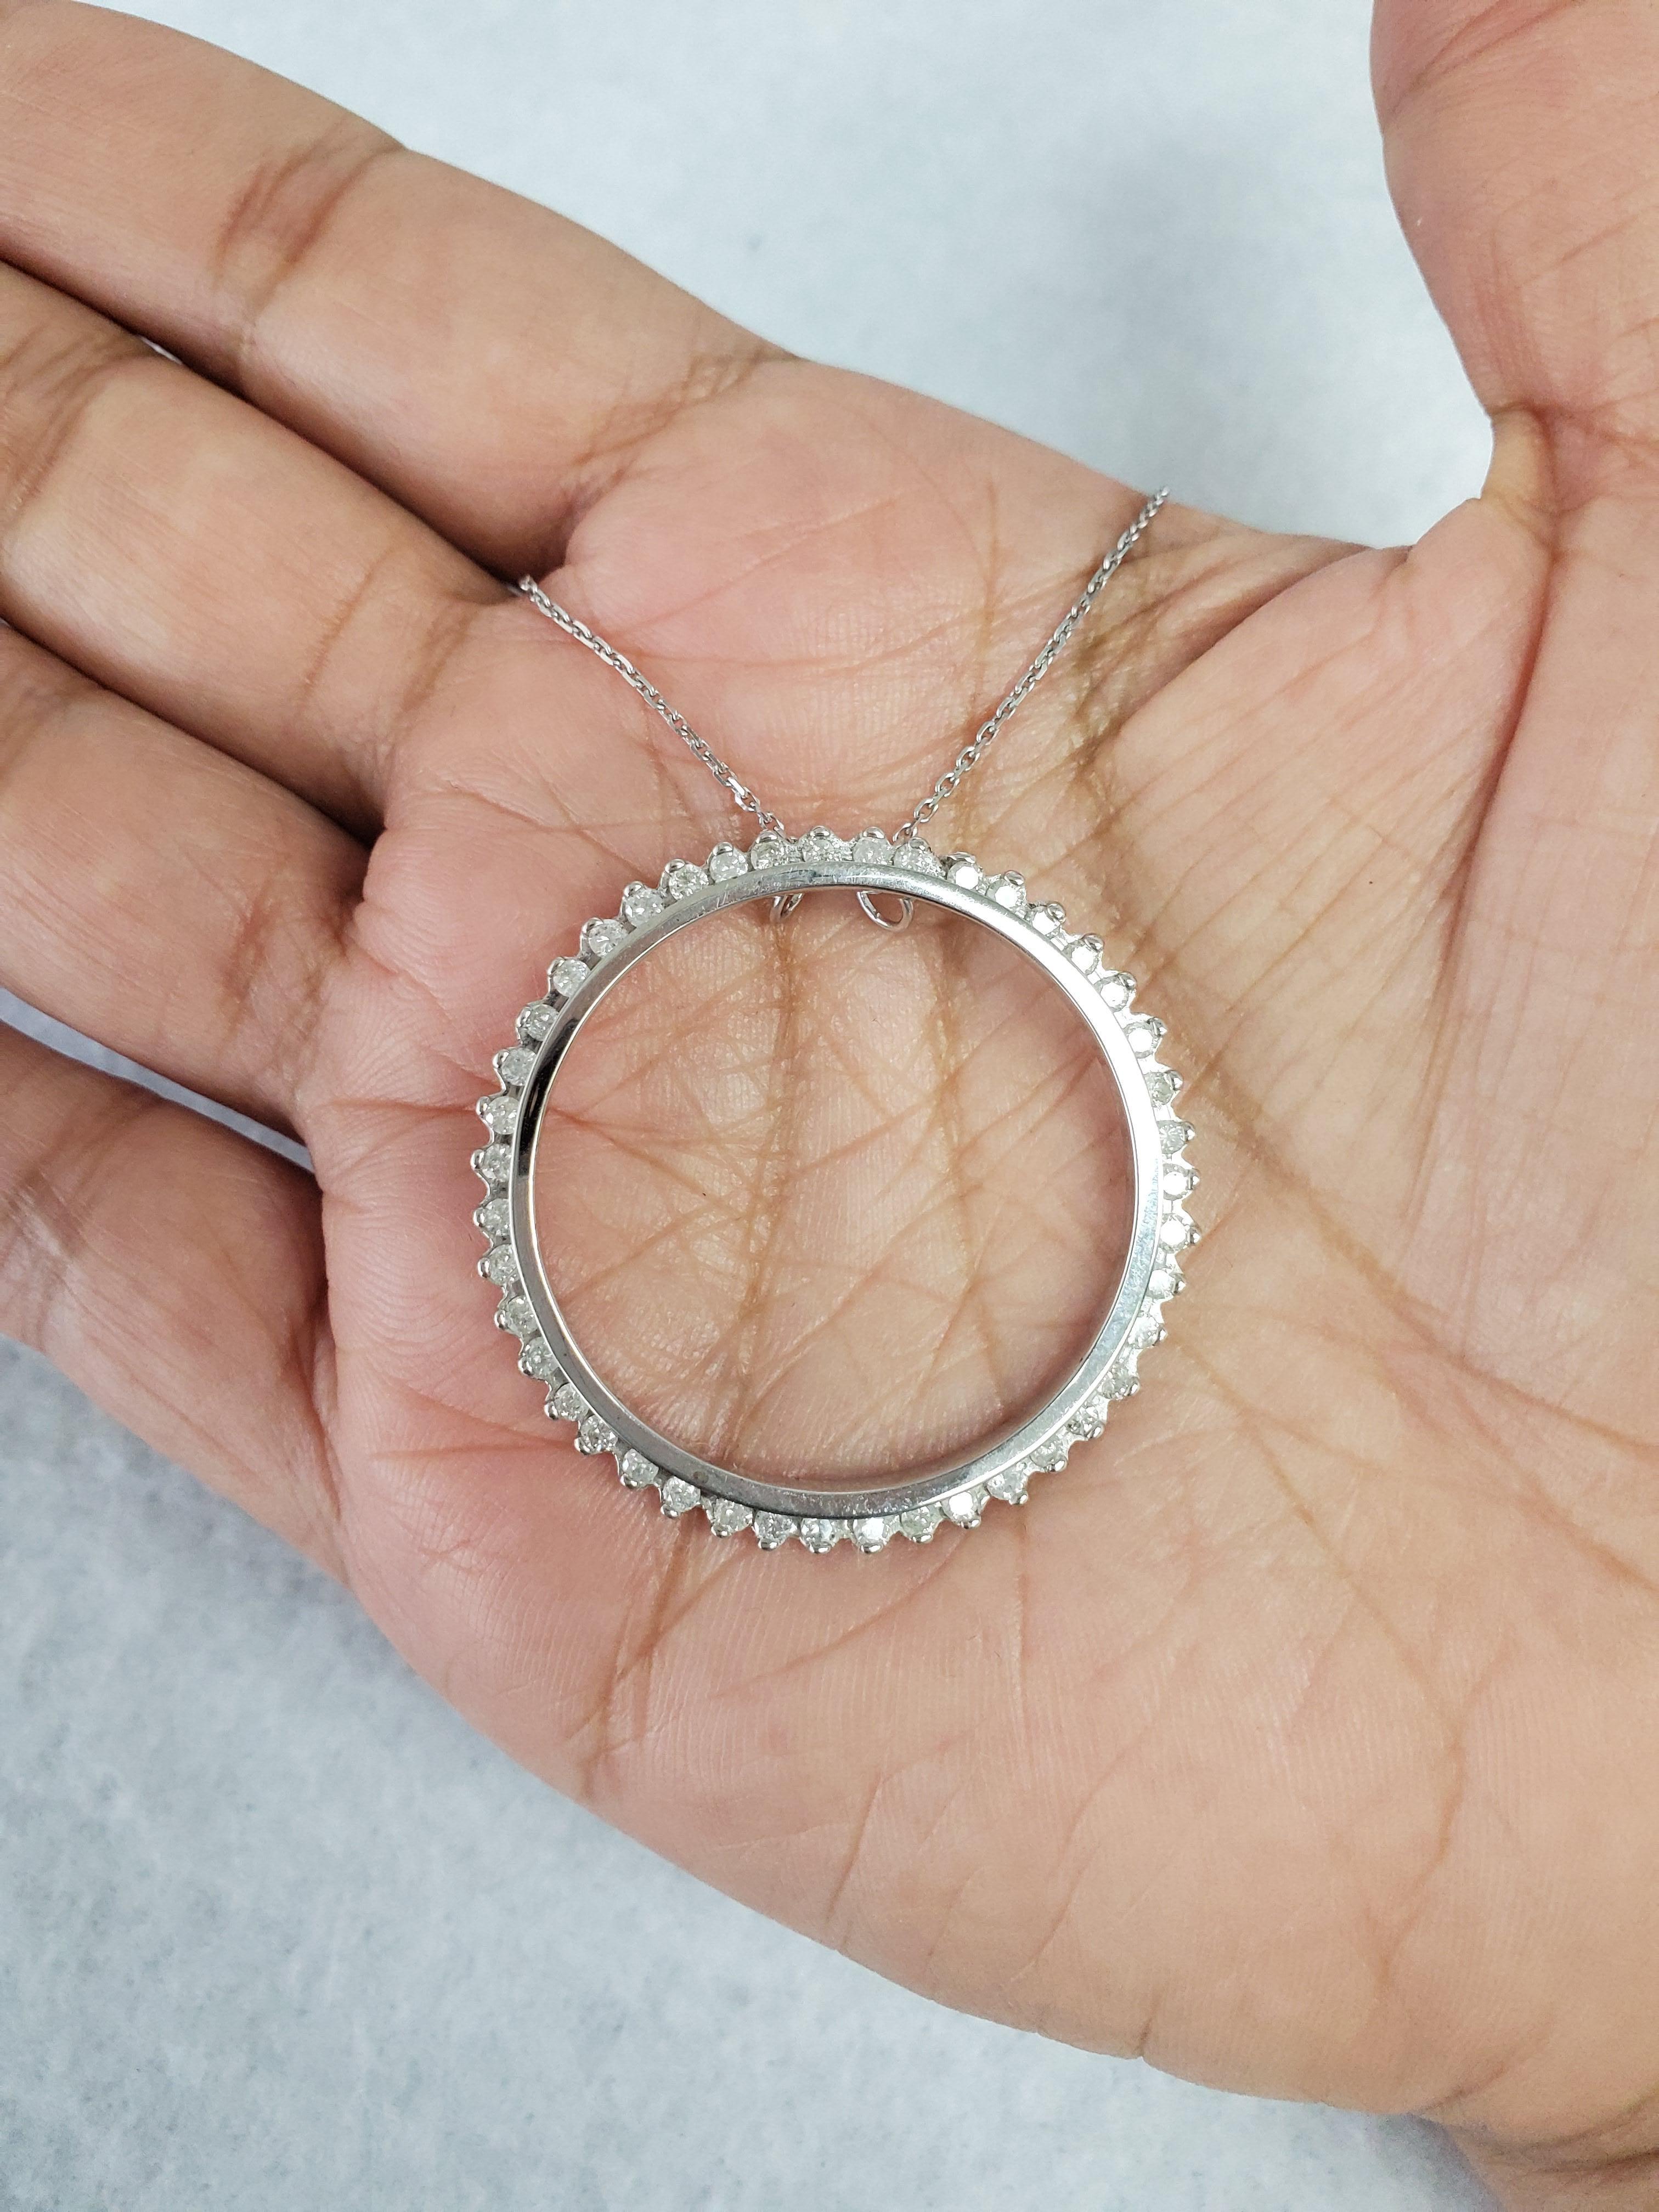 ♥ Product Summary ♥

Main Stone: Diamonds
Approx. Total Carat Weight: 1.06cttw
Diamond Color: H
Diamond Clarity: I1/I2
Stone Cut: Round
Metal Choice: 14K White Gold
Dimensions: 38mm
Chain: 16